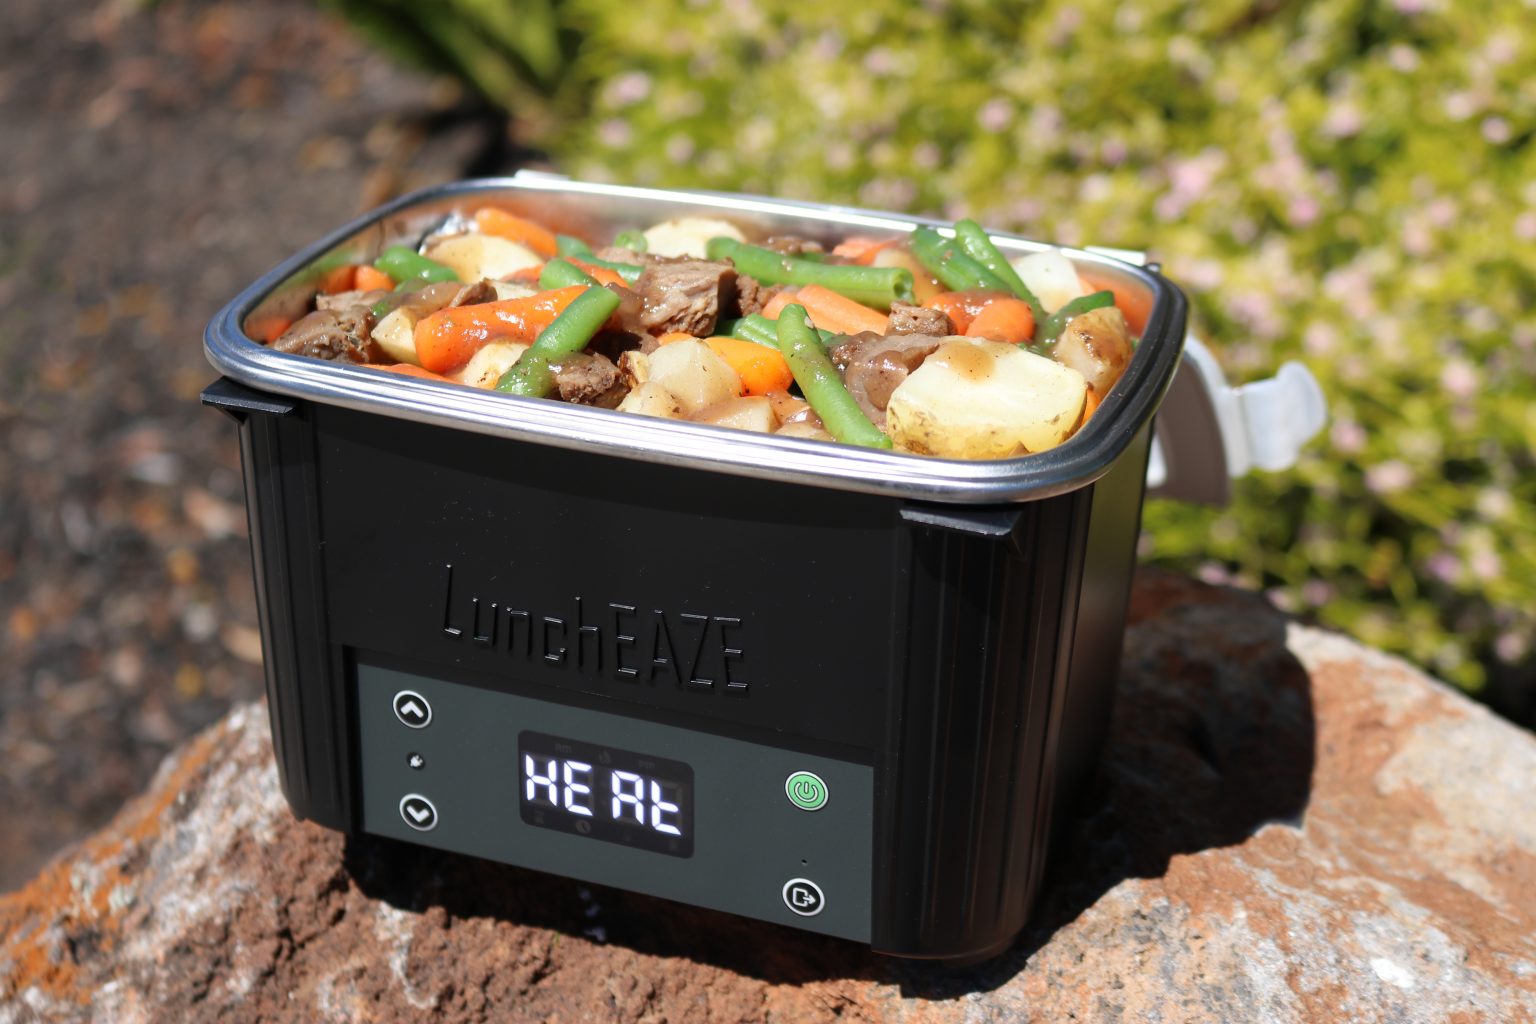 LunchEAZE Lite heated lunch box